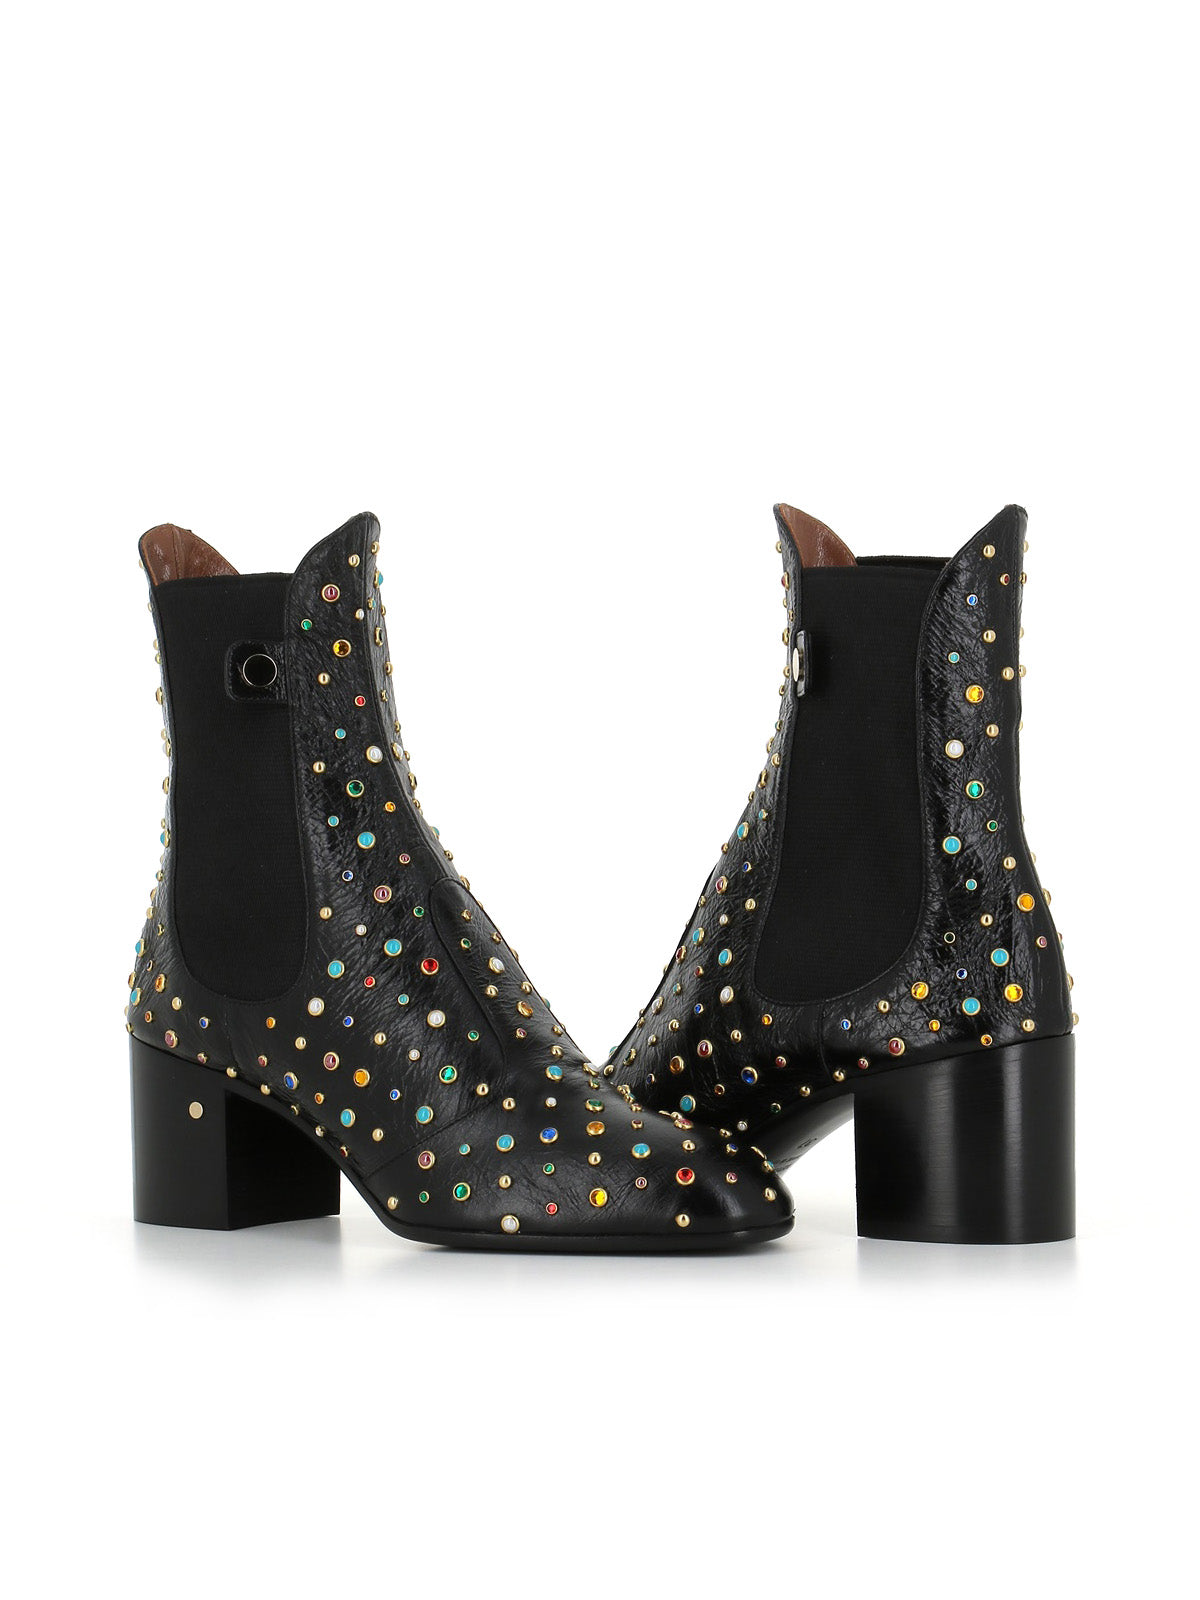  Boot Angie Multicolor Studs Laurence Dacade Donna Nero - 1